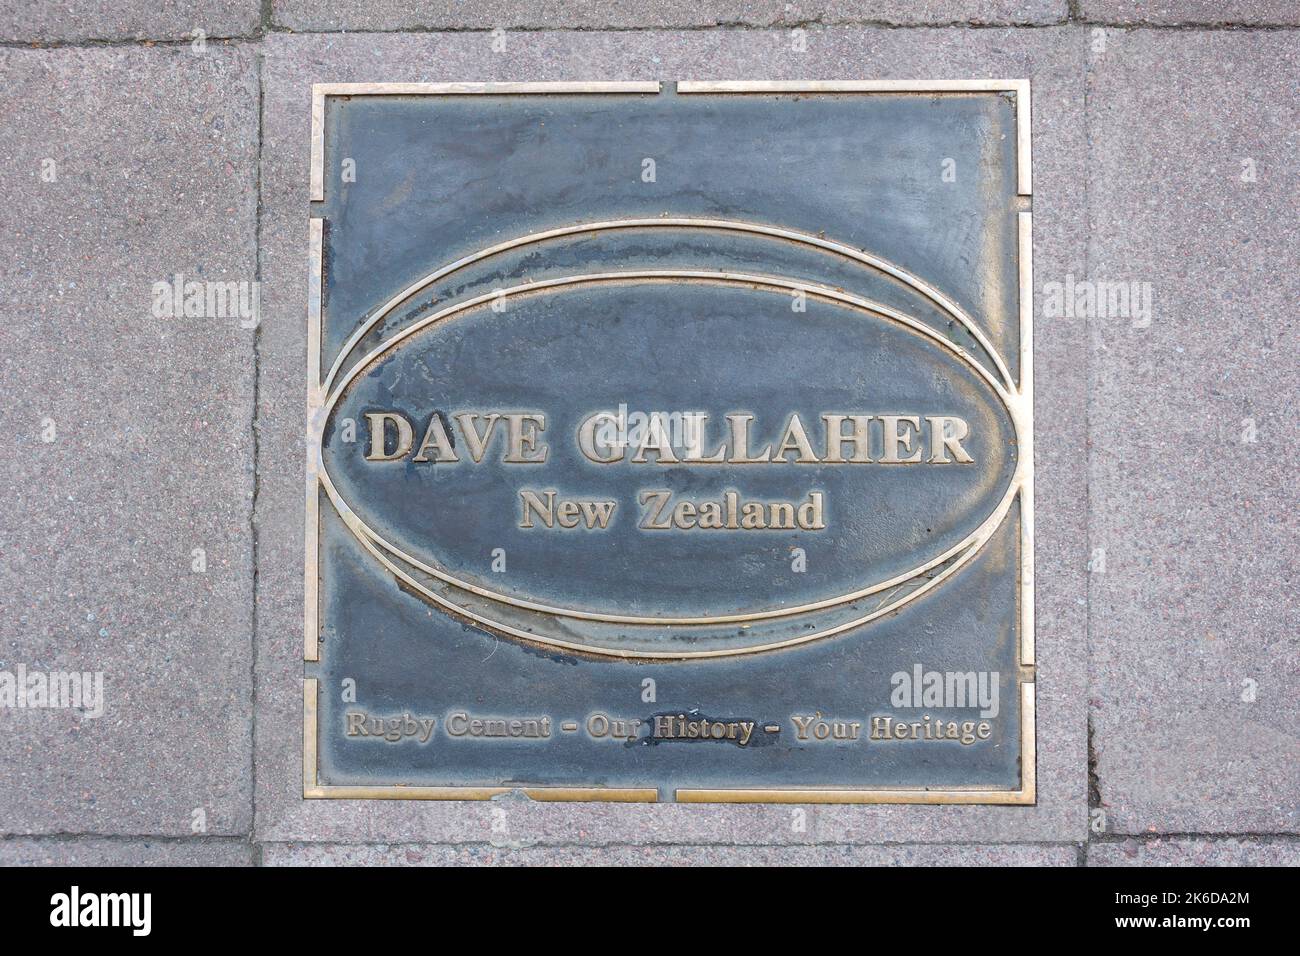 Rugby player (Dave Gallaher, New Zealand) pavement plaque, Regent Street, Rugby, Warwickshire, England, United Kingdom Stock Photo